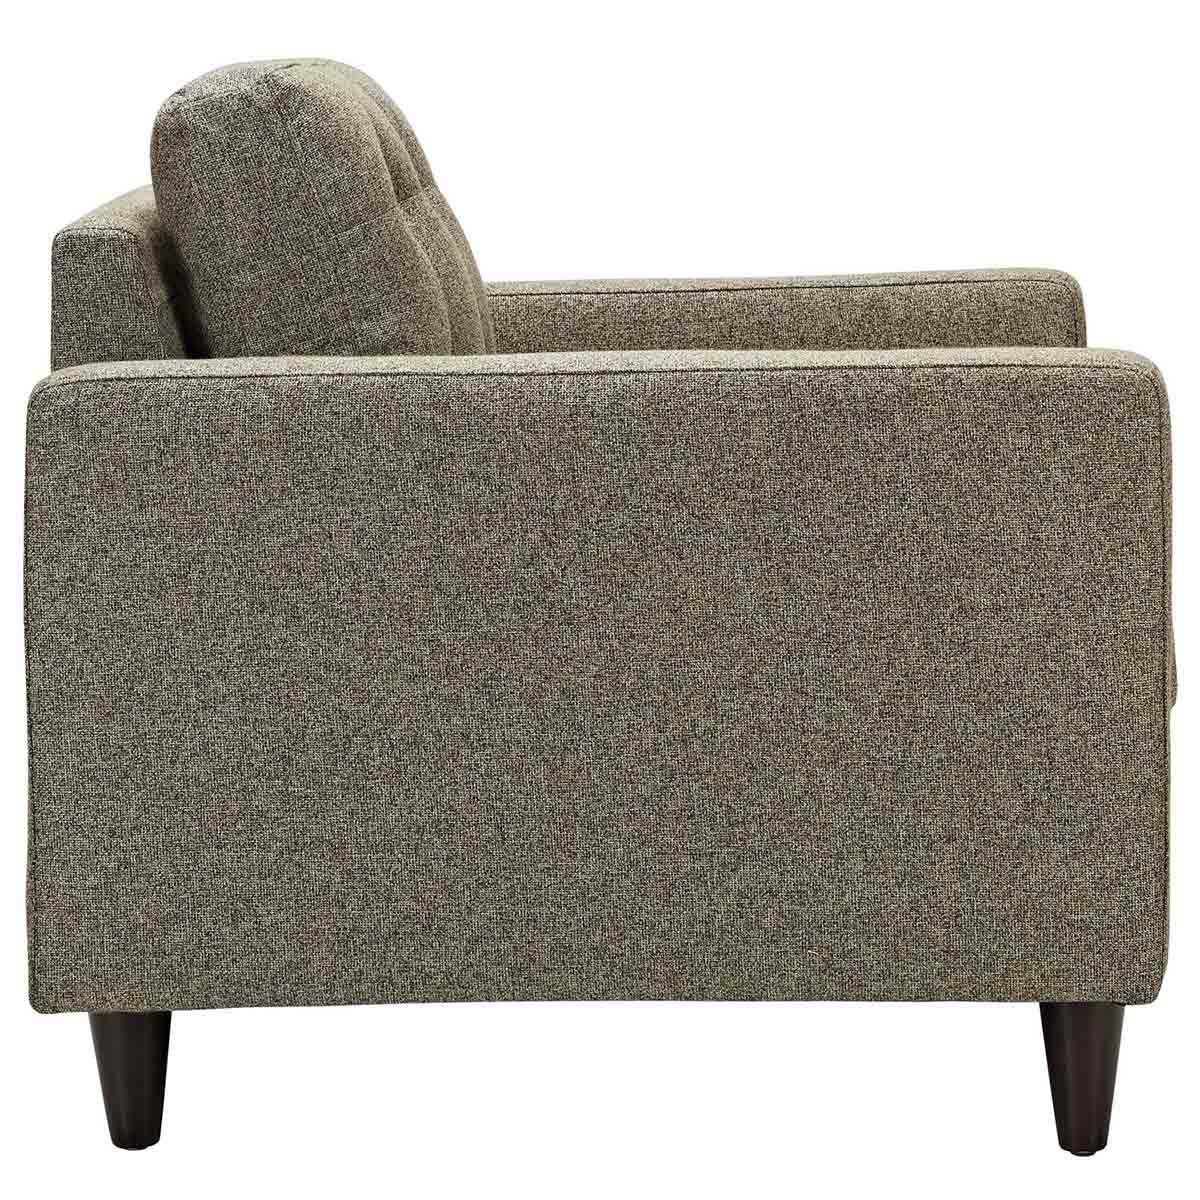 Modway Empress Upholstered Armchair - Oatmeal